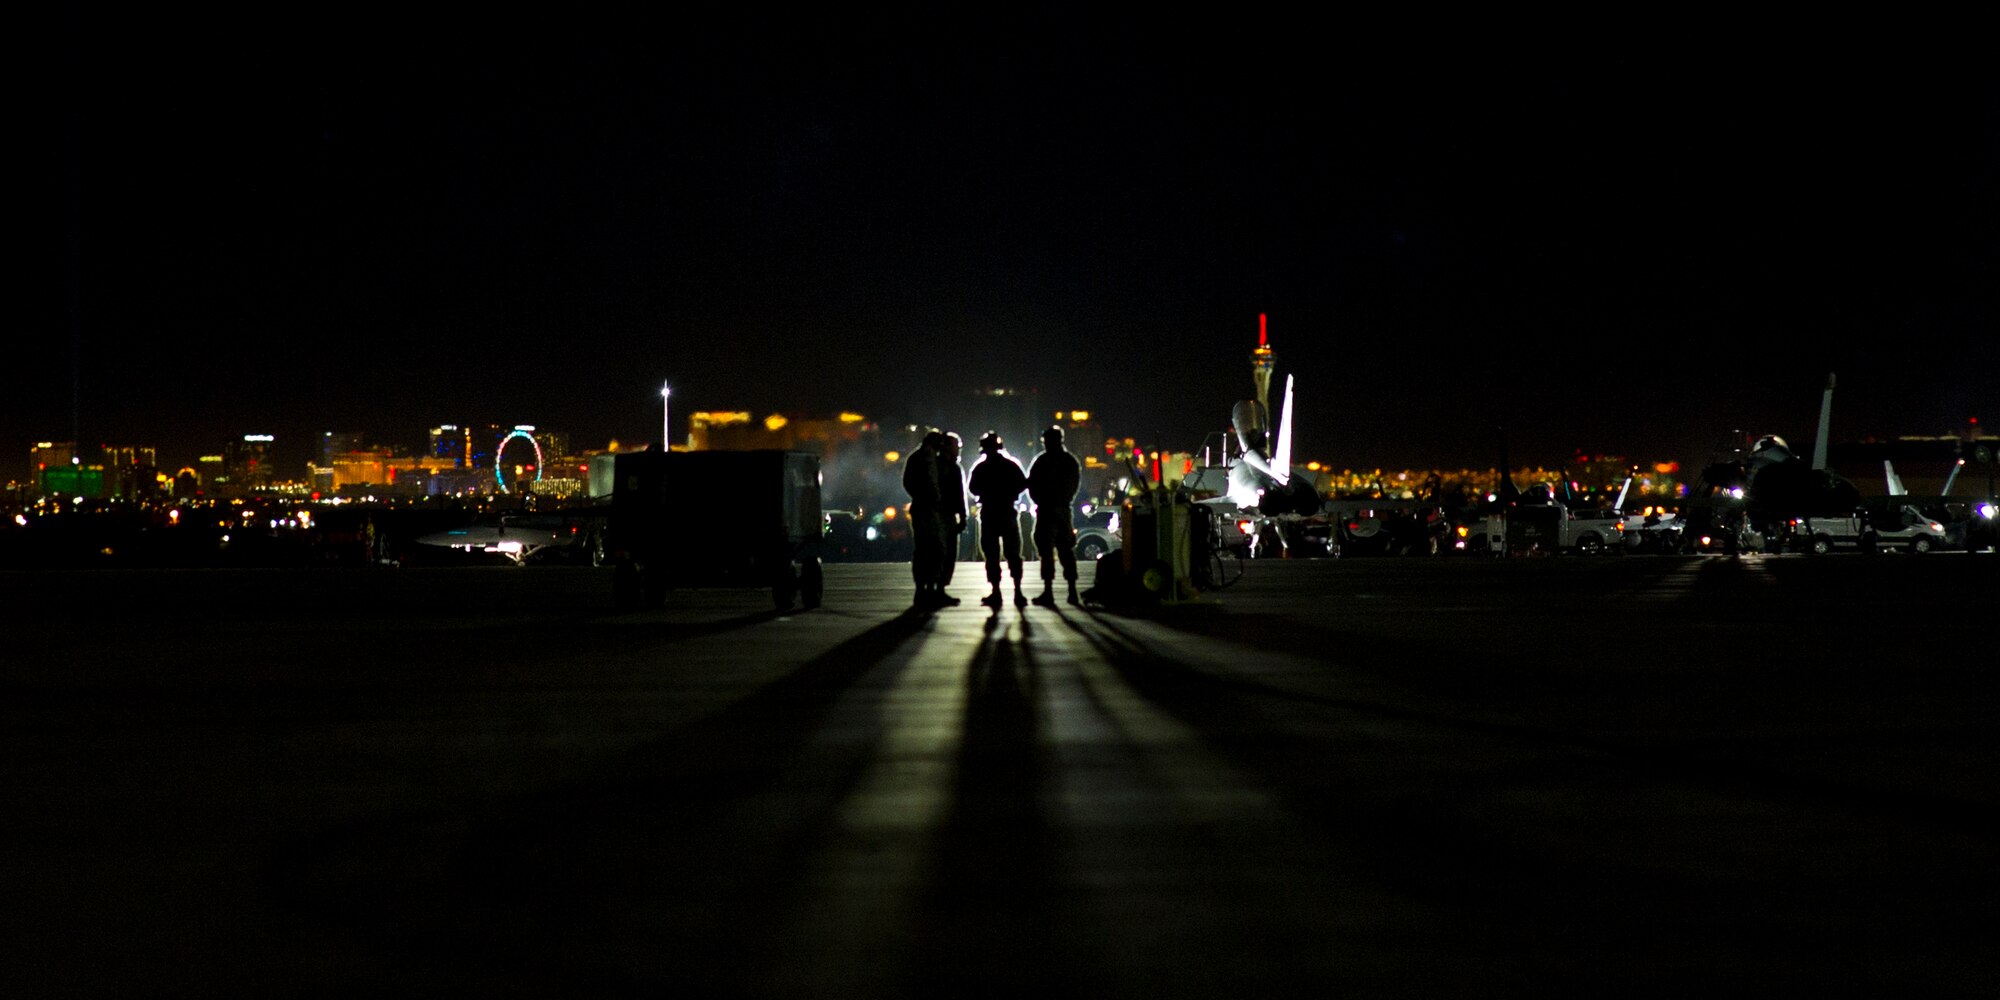 Four Airmen stand on the flightline looking toward the lights of Las Vegas Jan. 26, at Nellis AFB, Nev. The Airmen are part of more than 3,000 personnel from over 30 units including squadrons from Australia and the United Kingdom here to participate in Red Flag 16-1. (U.S. Air Force photo by Senior Airman Alex Fox Echols III/Released)  